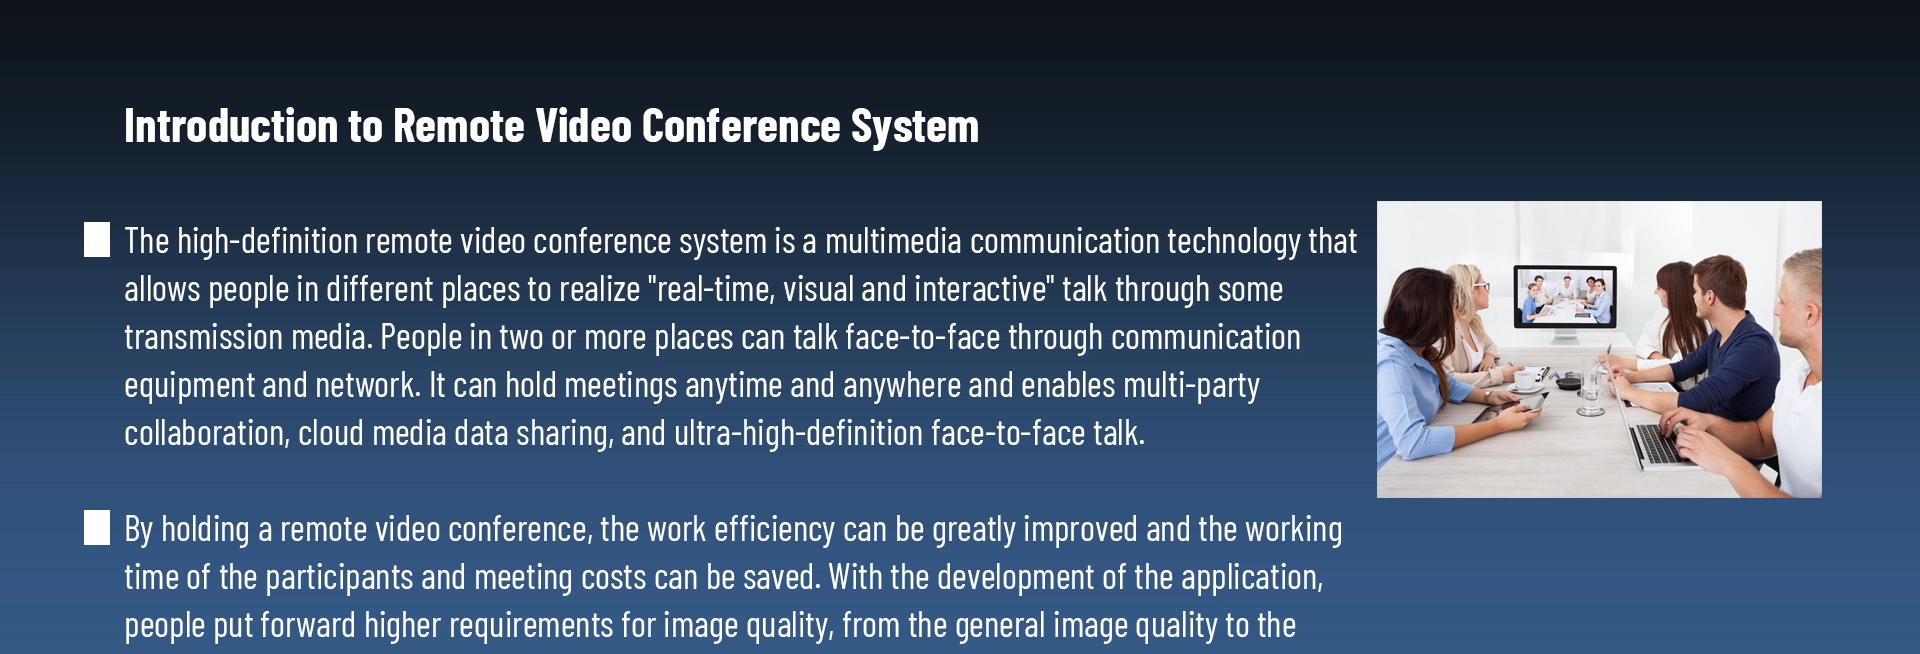 HD Video Conference MCU (10-40 channels)